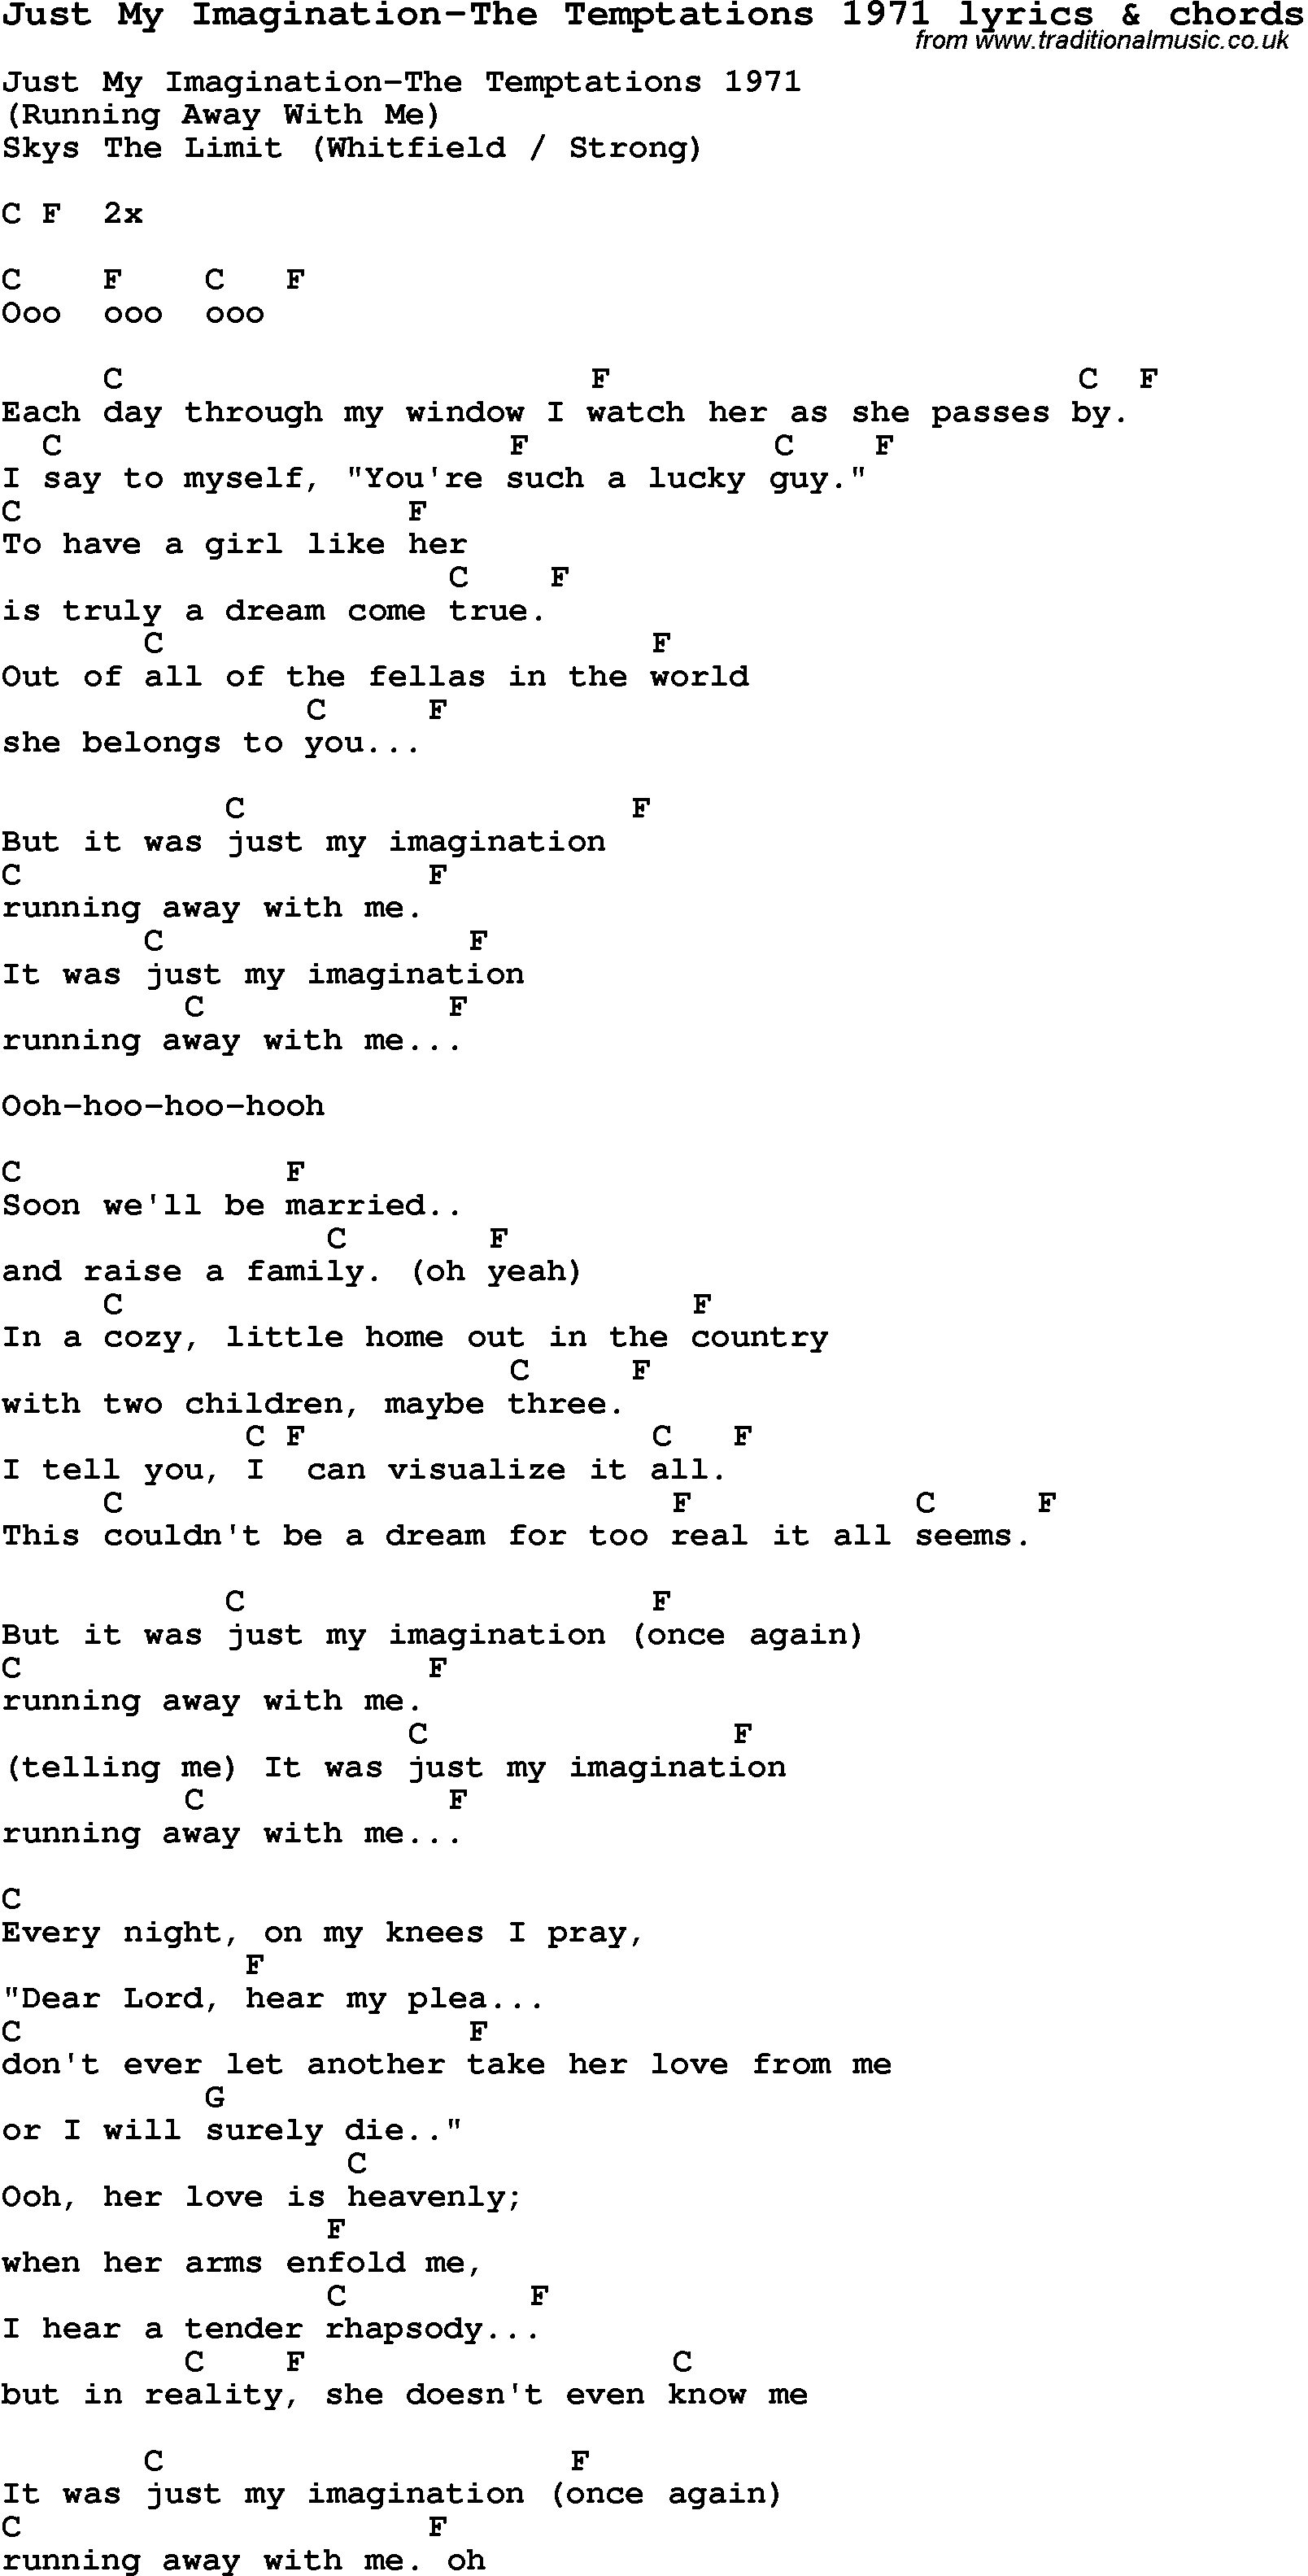 Love Song Lyrics for: Just My Imagination-The Temptations 1971 with chords for Ukulele, Guitar Banjo etc.